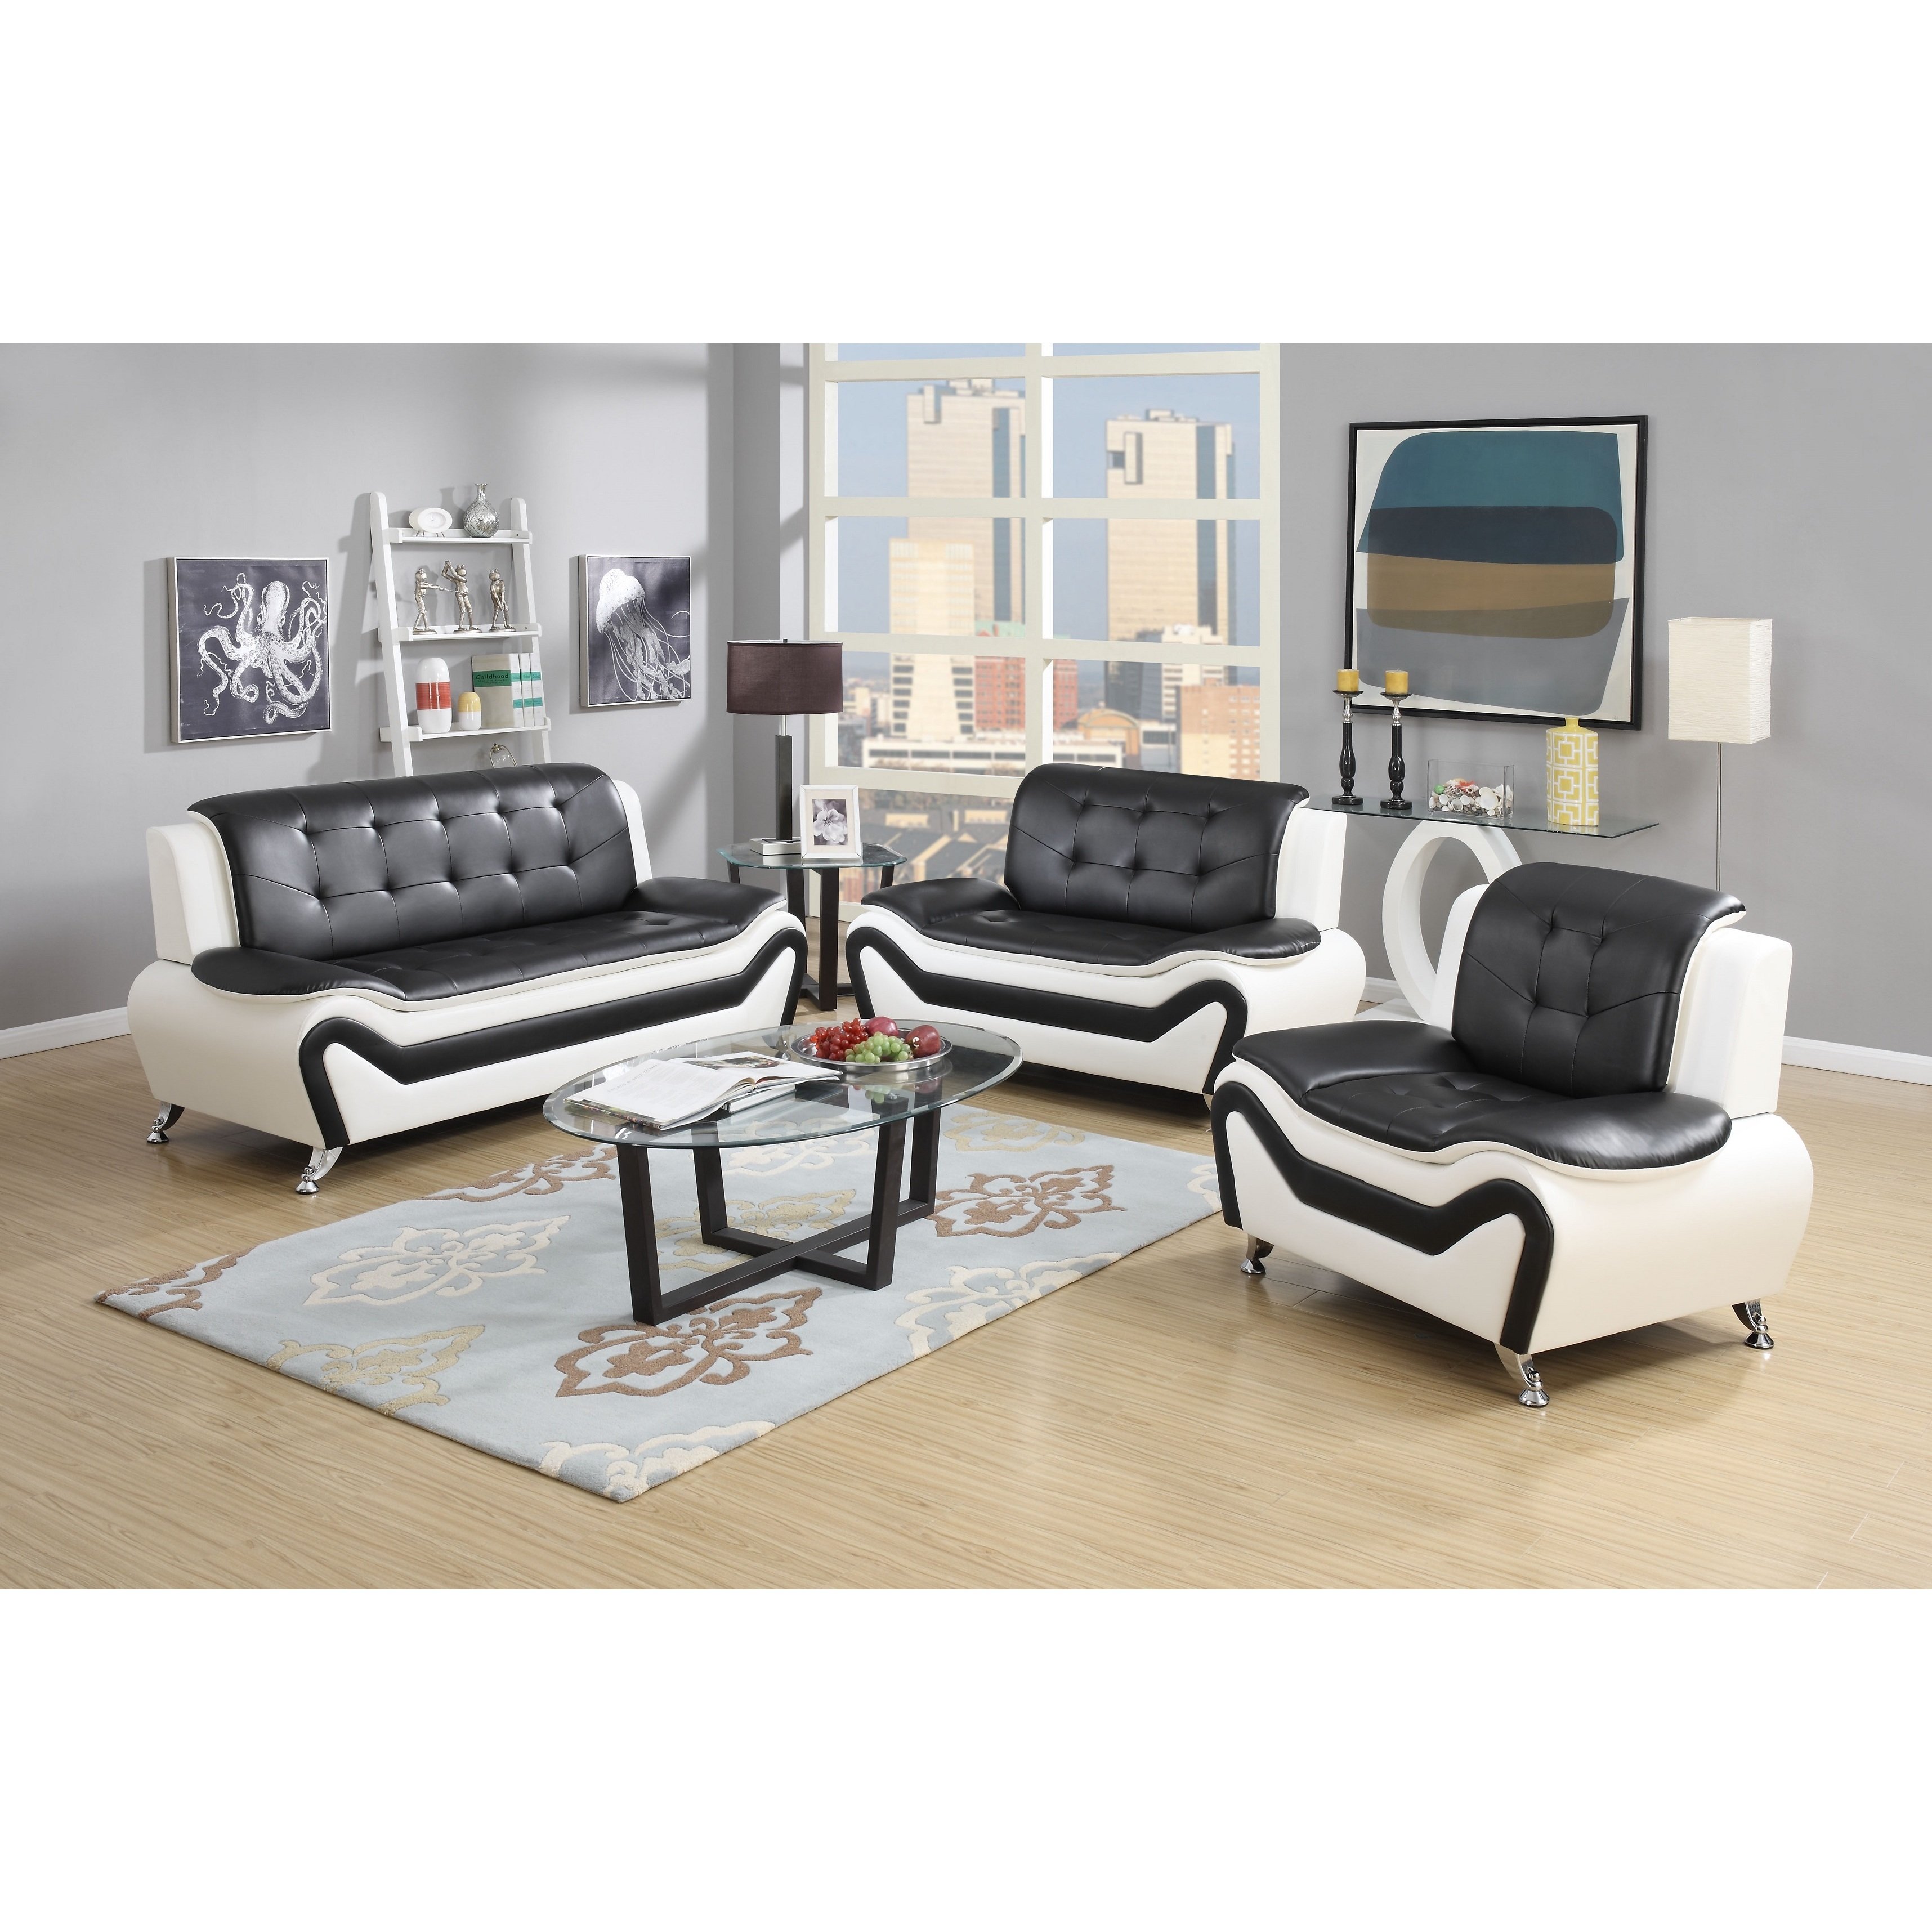 Shop Wanda 3-Piece Modern Bonded Leather Sofa Set - Free Shipping Today -  Overstock - 10736797